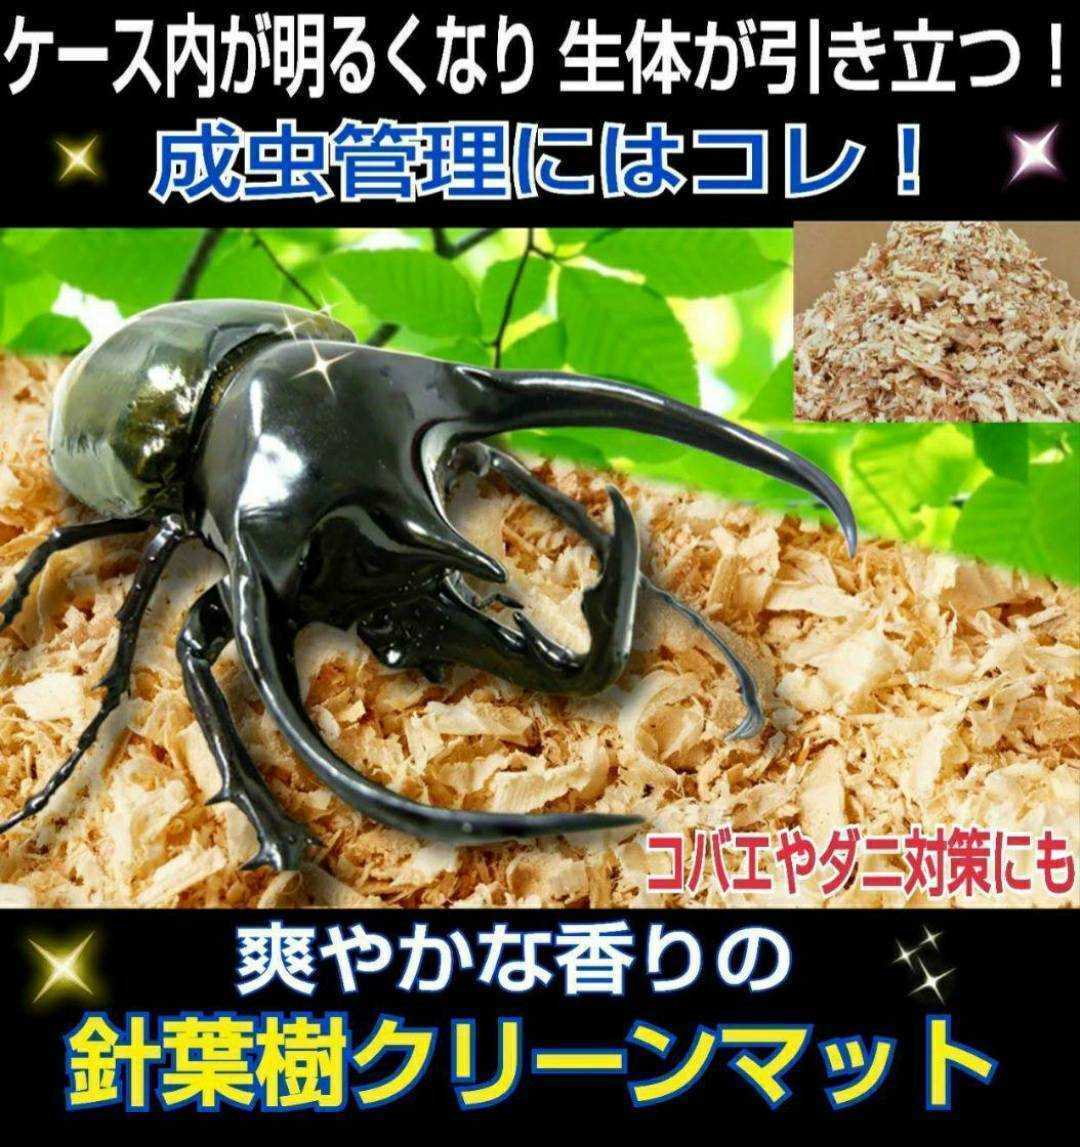  stag beetle, Kabuto. imago control is kore.! refreshing . fragrance. needle leaved tree mat [20L] case inside . bright becomes organism . conspicuous * mites *kobae.. not 